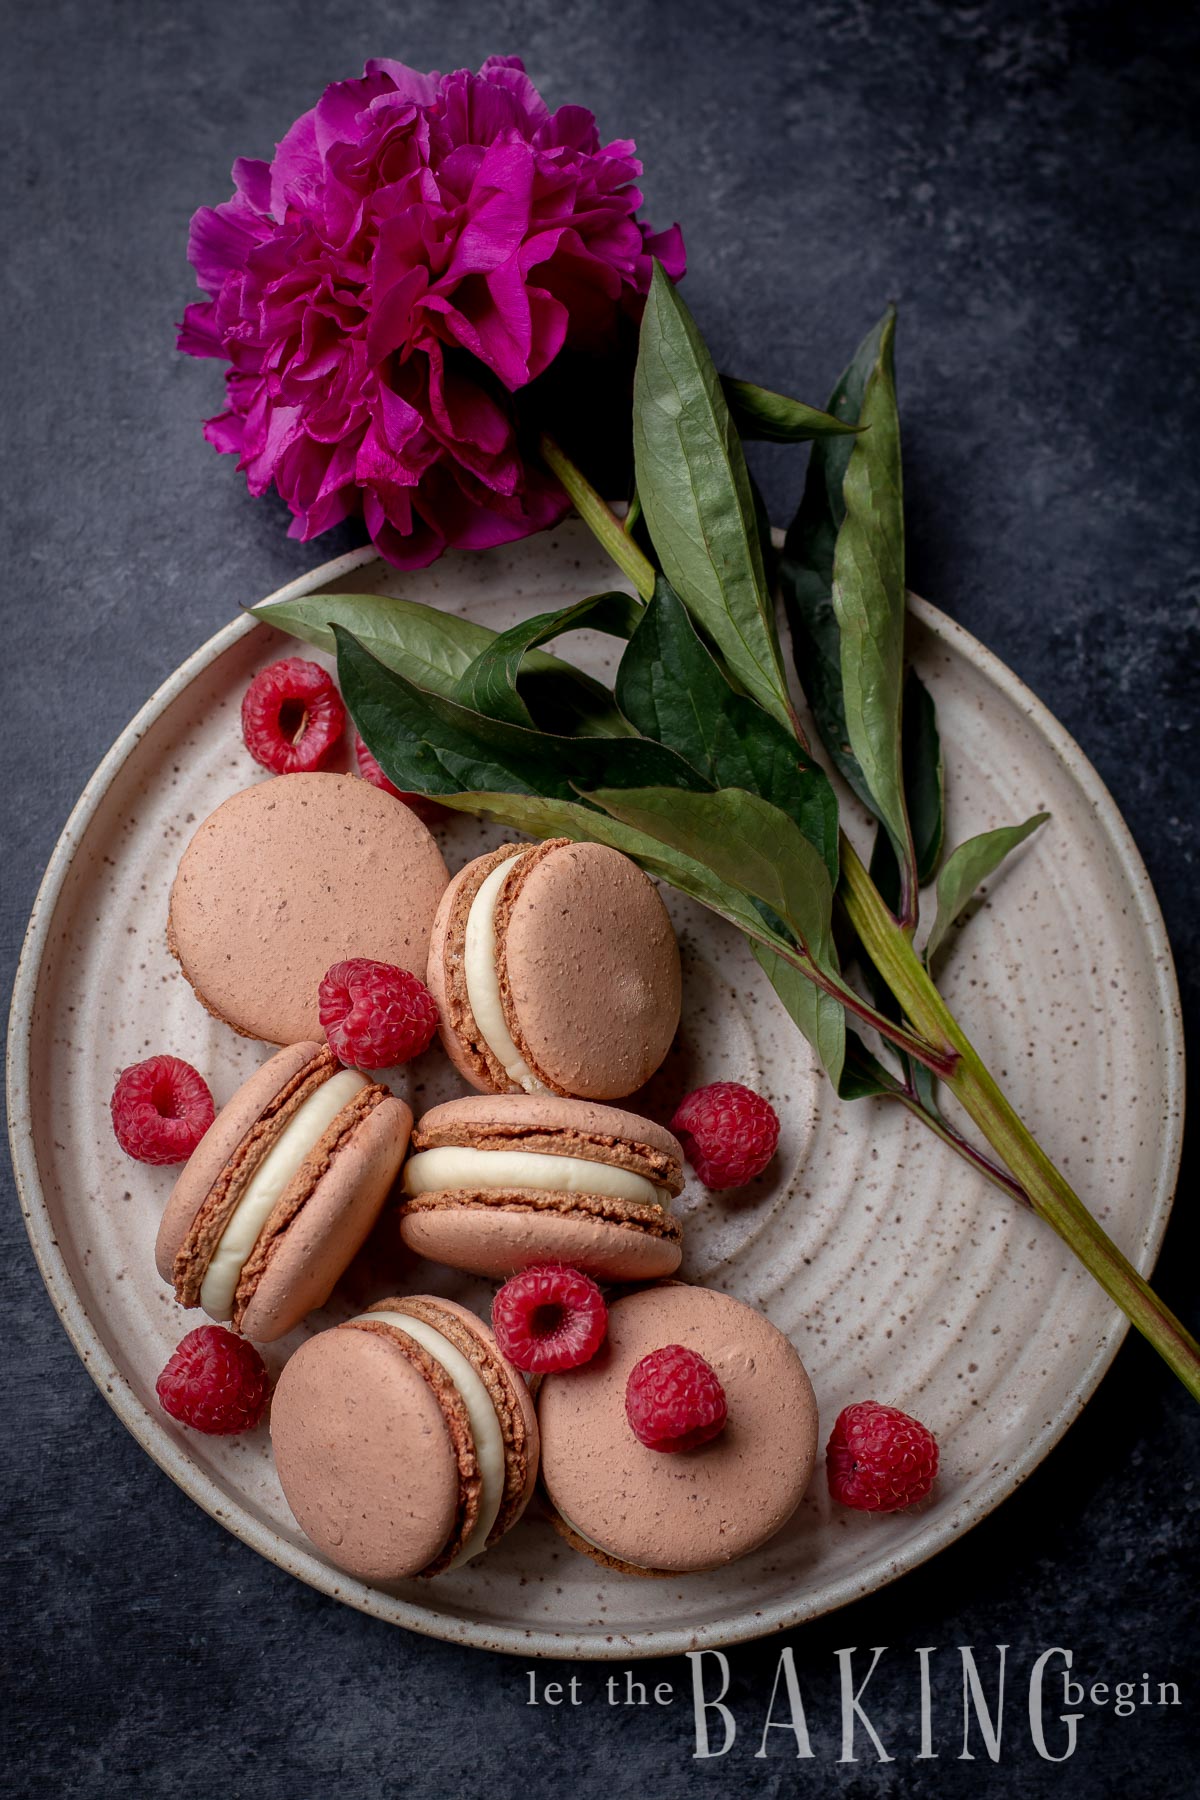 Macarons filled with White Chocolate Ganache and a fresh raspberry. These sweet meringue and chocolate cookies are so addicting!